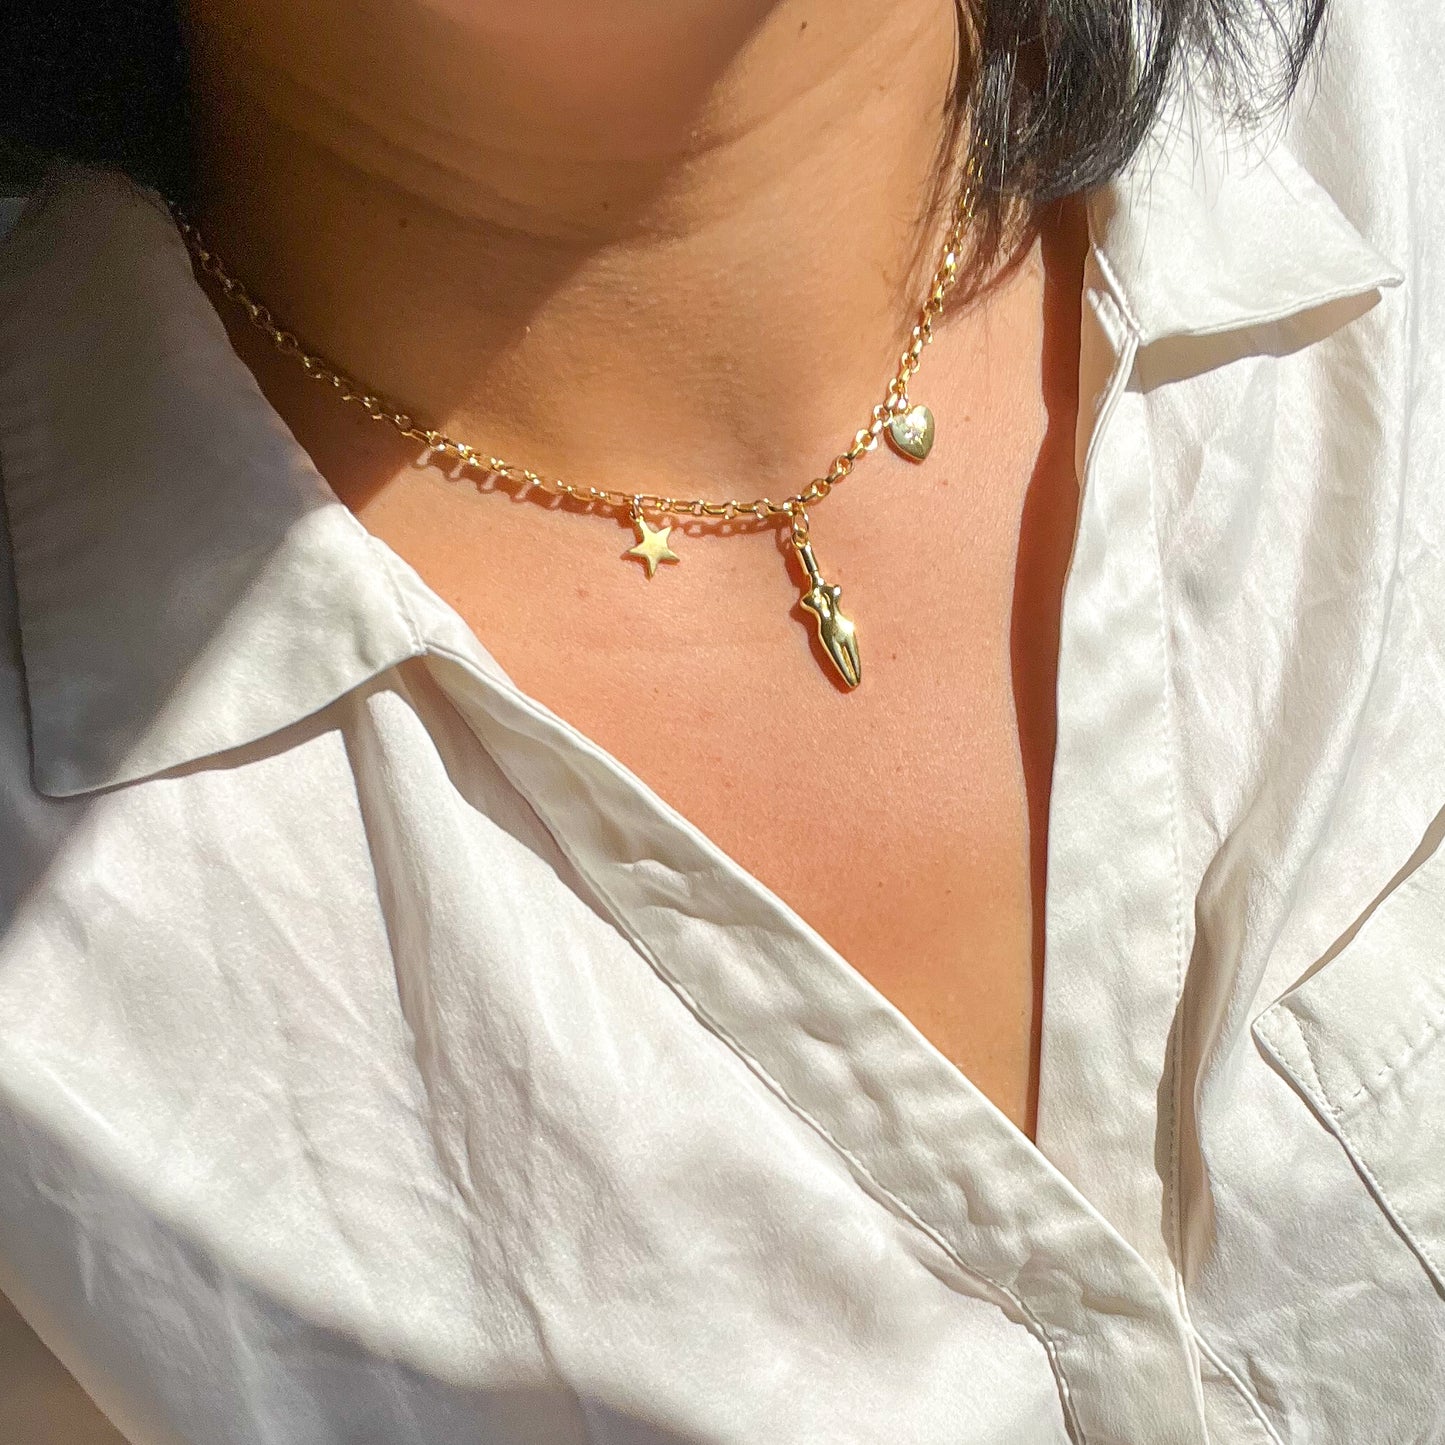 A close-up of model’s neck and chest area wearing a white silk button up shirt and the Lucia charm necklace. A 3 charm gold-filled necklace with a star (left side), body (center charm), and a cubic zirconia heart charm (right side). Heart charm has a cubic zirconia stone setting in the center of charm.